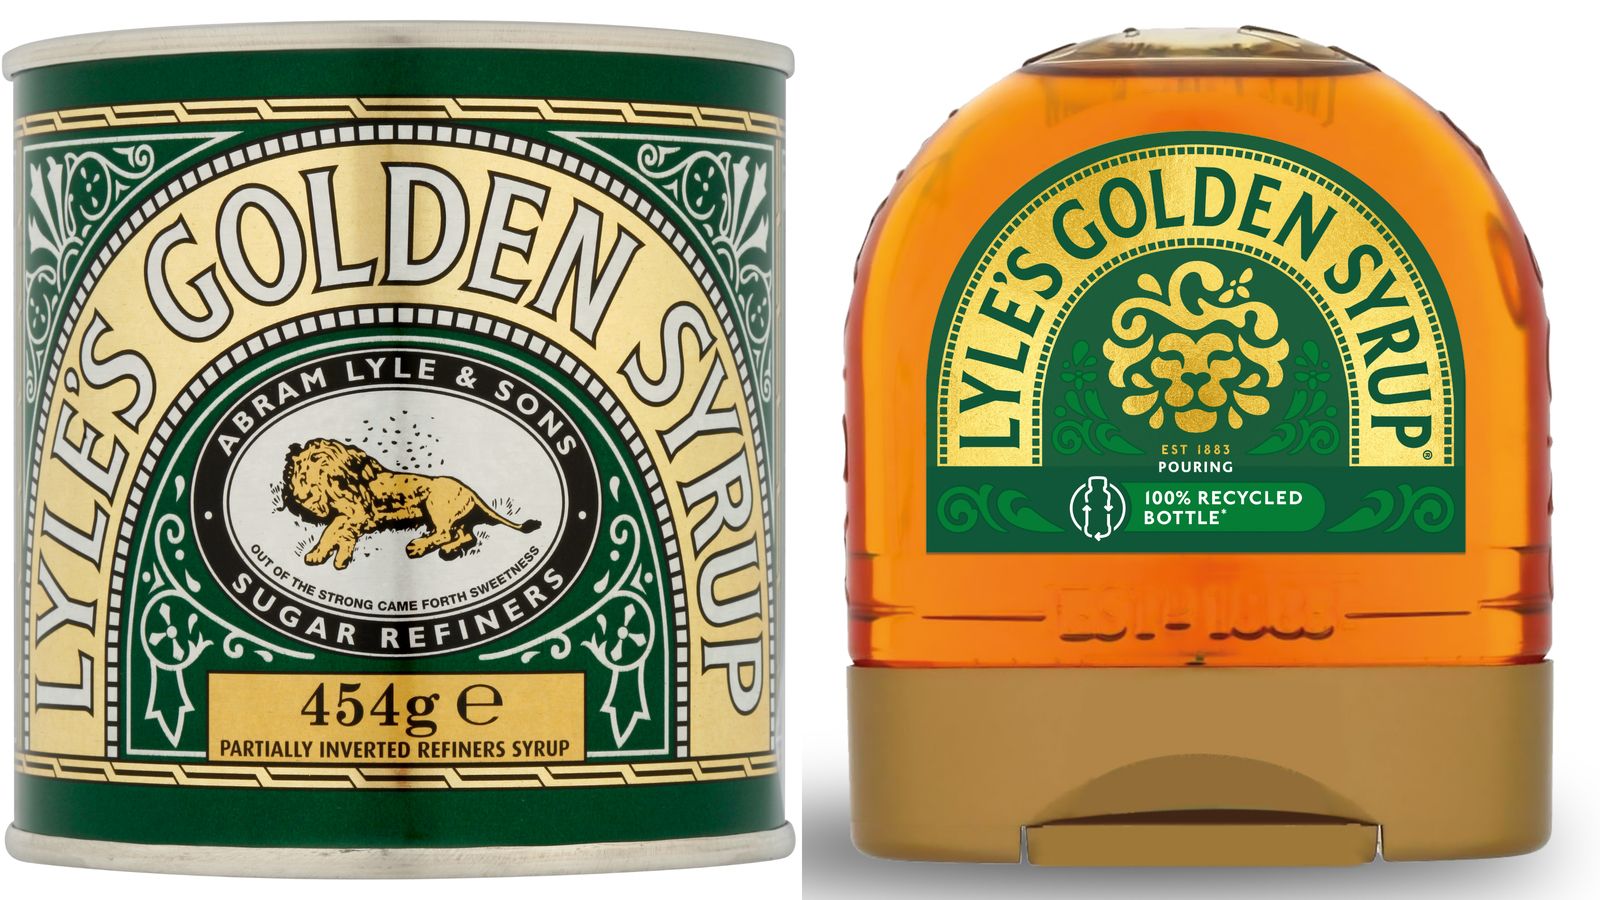 The original and new packaging and logo on Lyle's Golden Syrup. The product's canned varieties of syrup will retain the original logo.